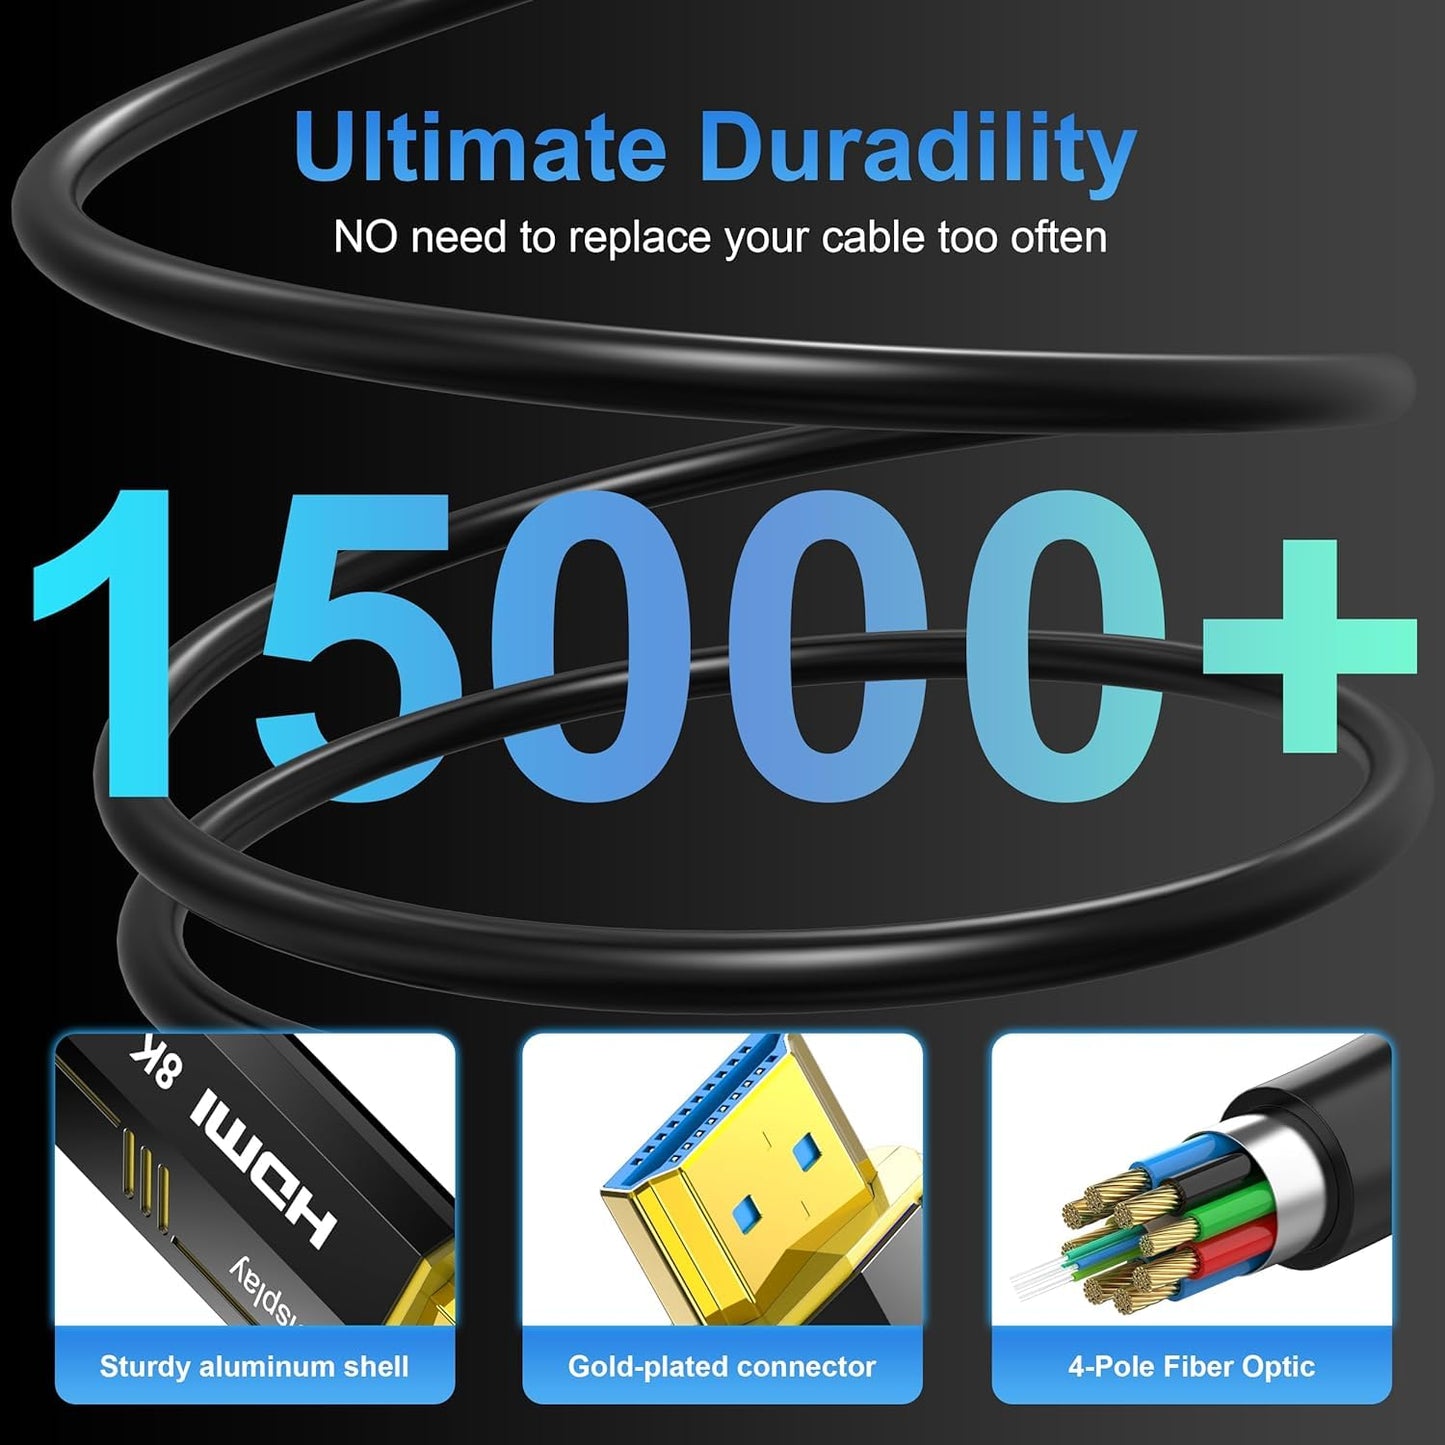 DGHUMEN Fiber Optic HDMI Cable 100FT, 8K (HDMI 2.1,48Gbps) Ultra High Speed HDMI Cord with Gold Plated Connectors, 8K@60Hz 4K@120Hz, Compatible for HDTV PC Projector Large Display, Male-to-Male